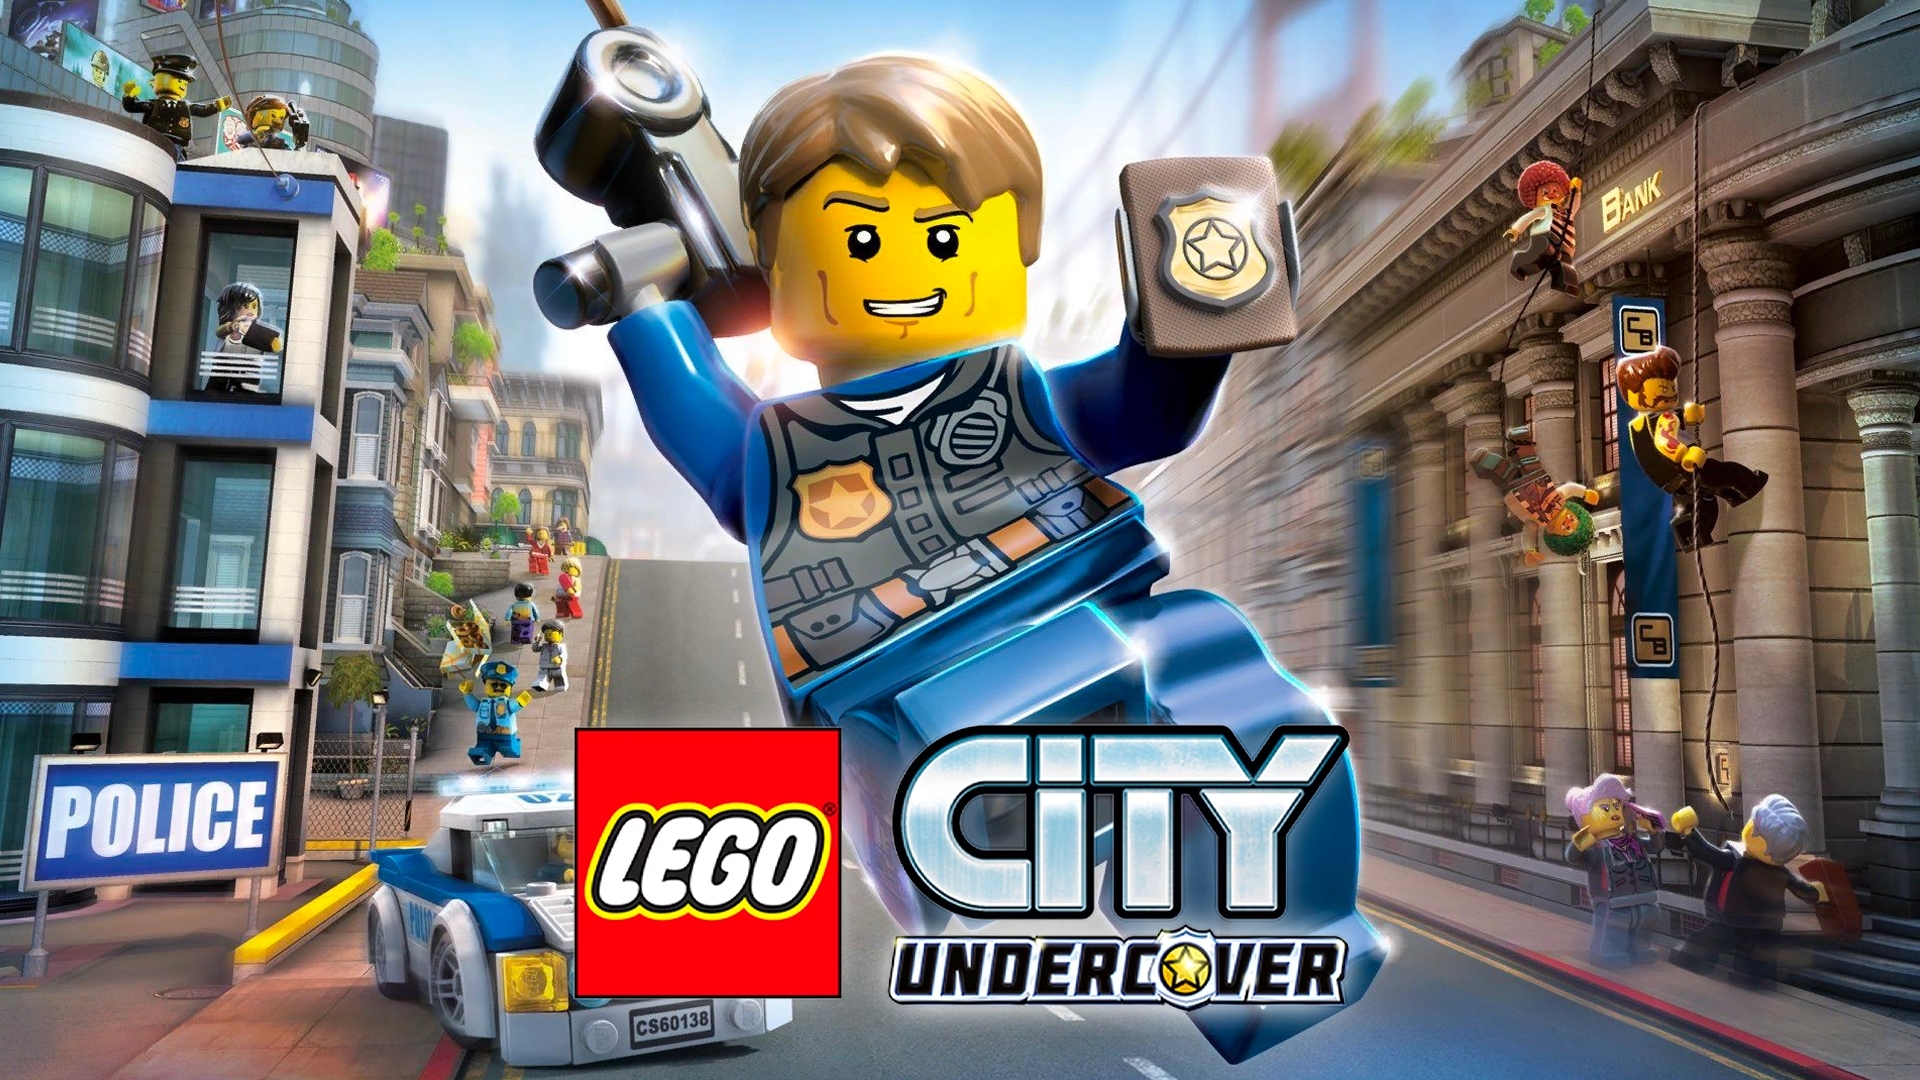 https://gaming-cdn.com/images/products/1799/orig/lego-city-undercover-pc-jeu-steam-cover.jpg?v=1704897019